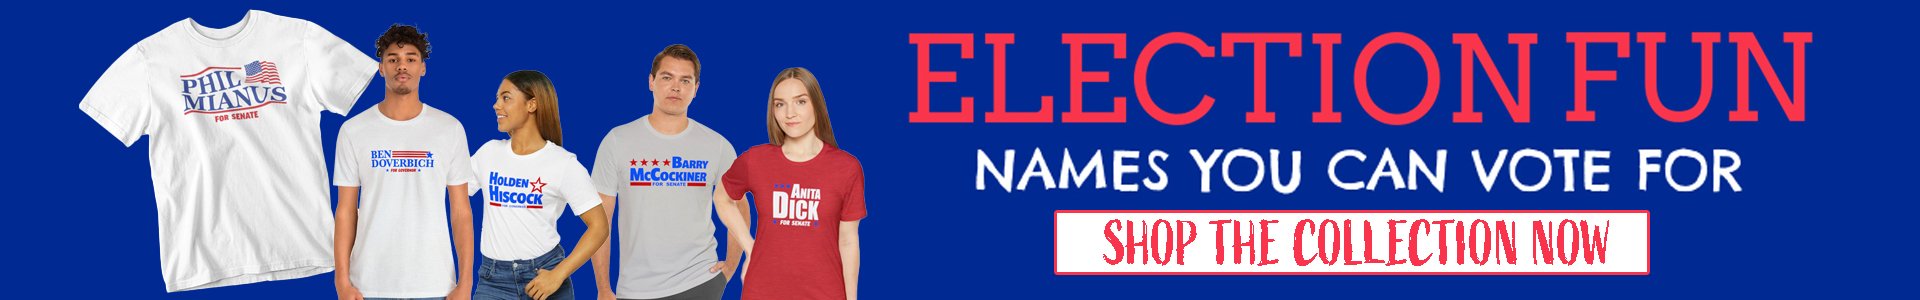 Shop Election Fun Shirts - Names You Can Vote For